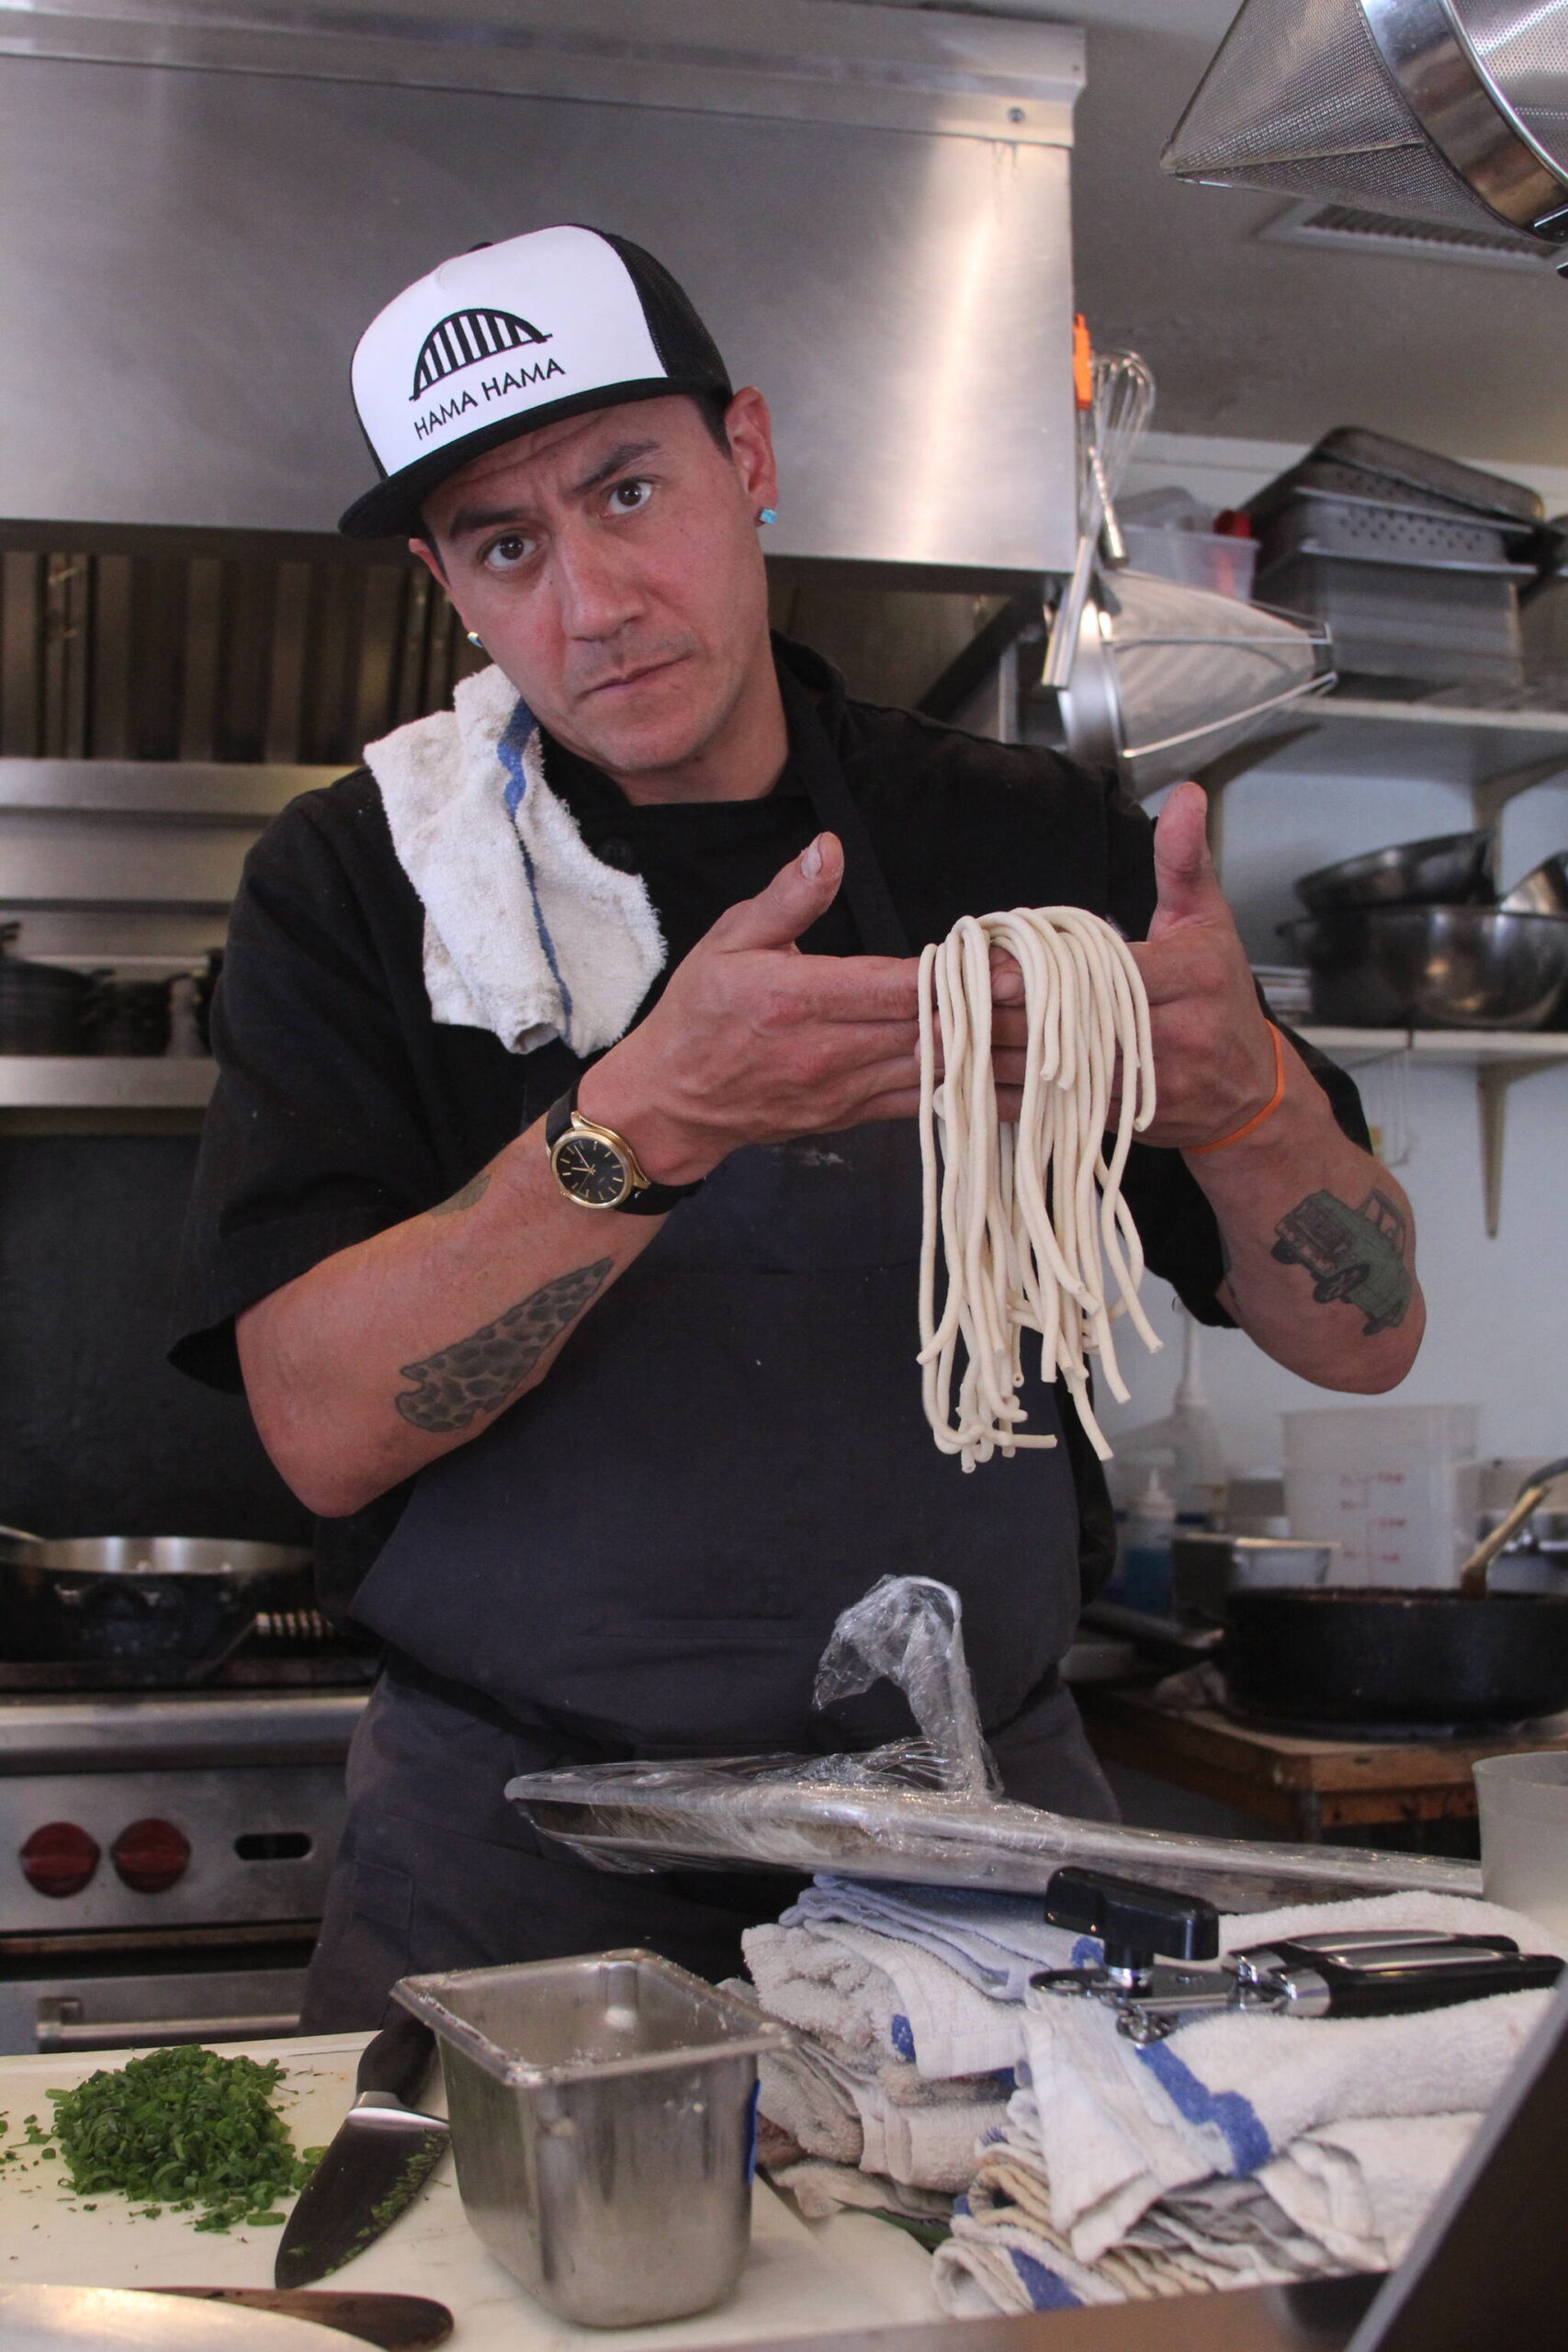 Photo by Karina Andrew/Whidbey News-Times
Jones shows off pasta made from scratch.